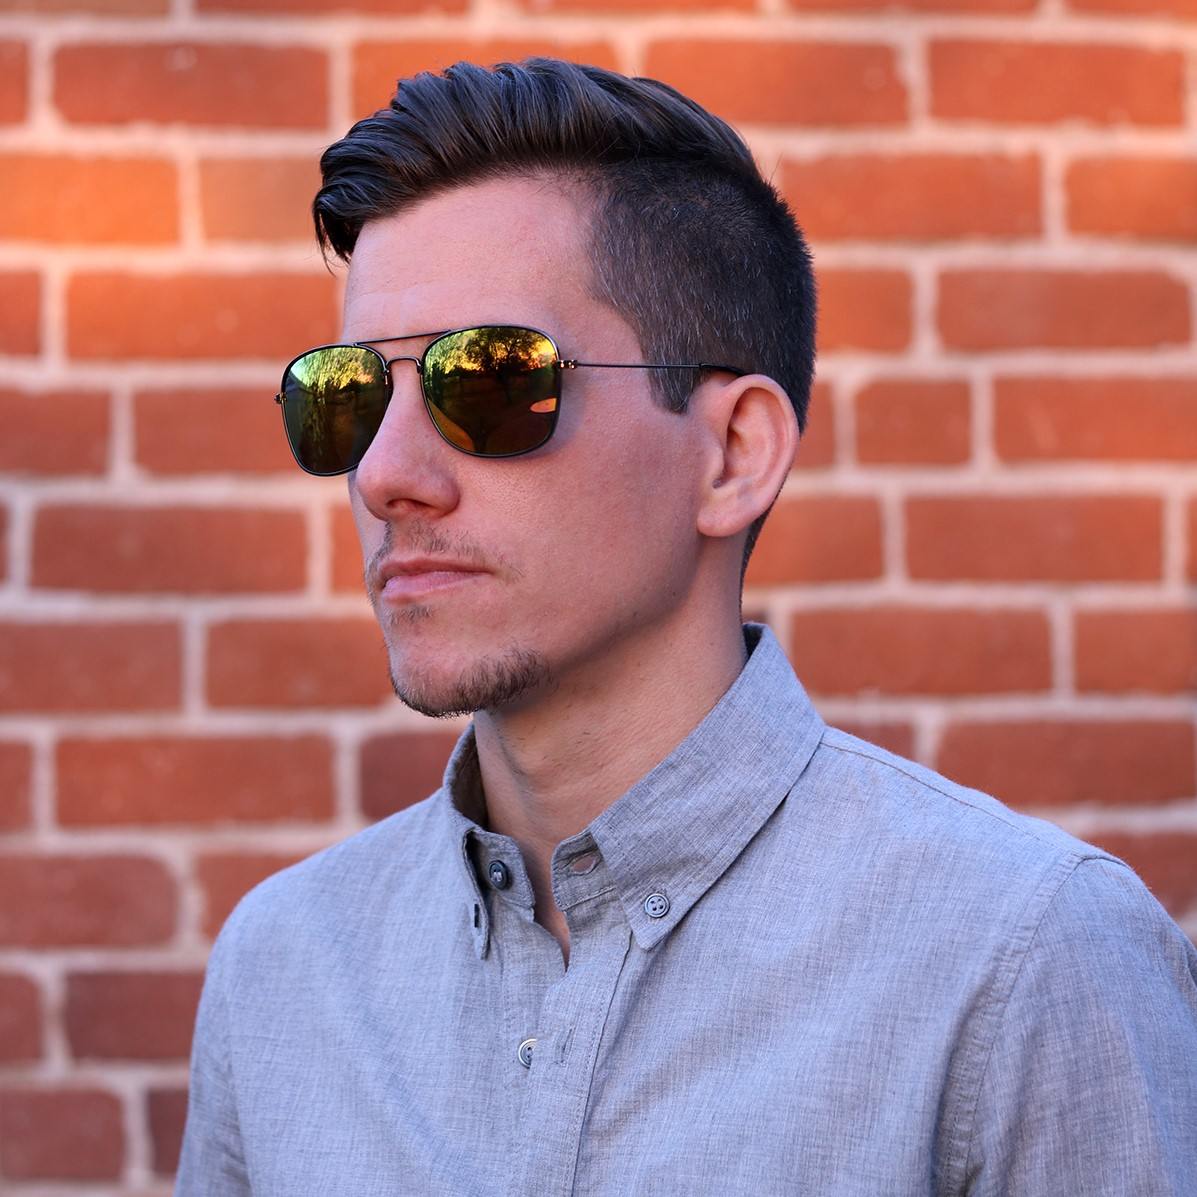 ray ban aviators with thick sides